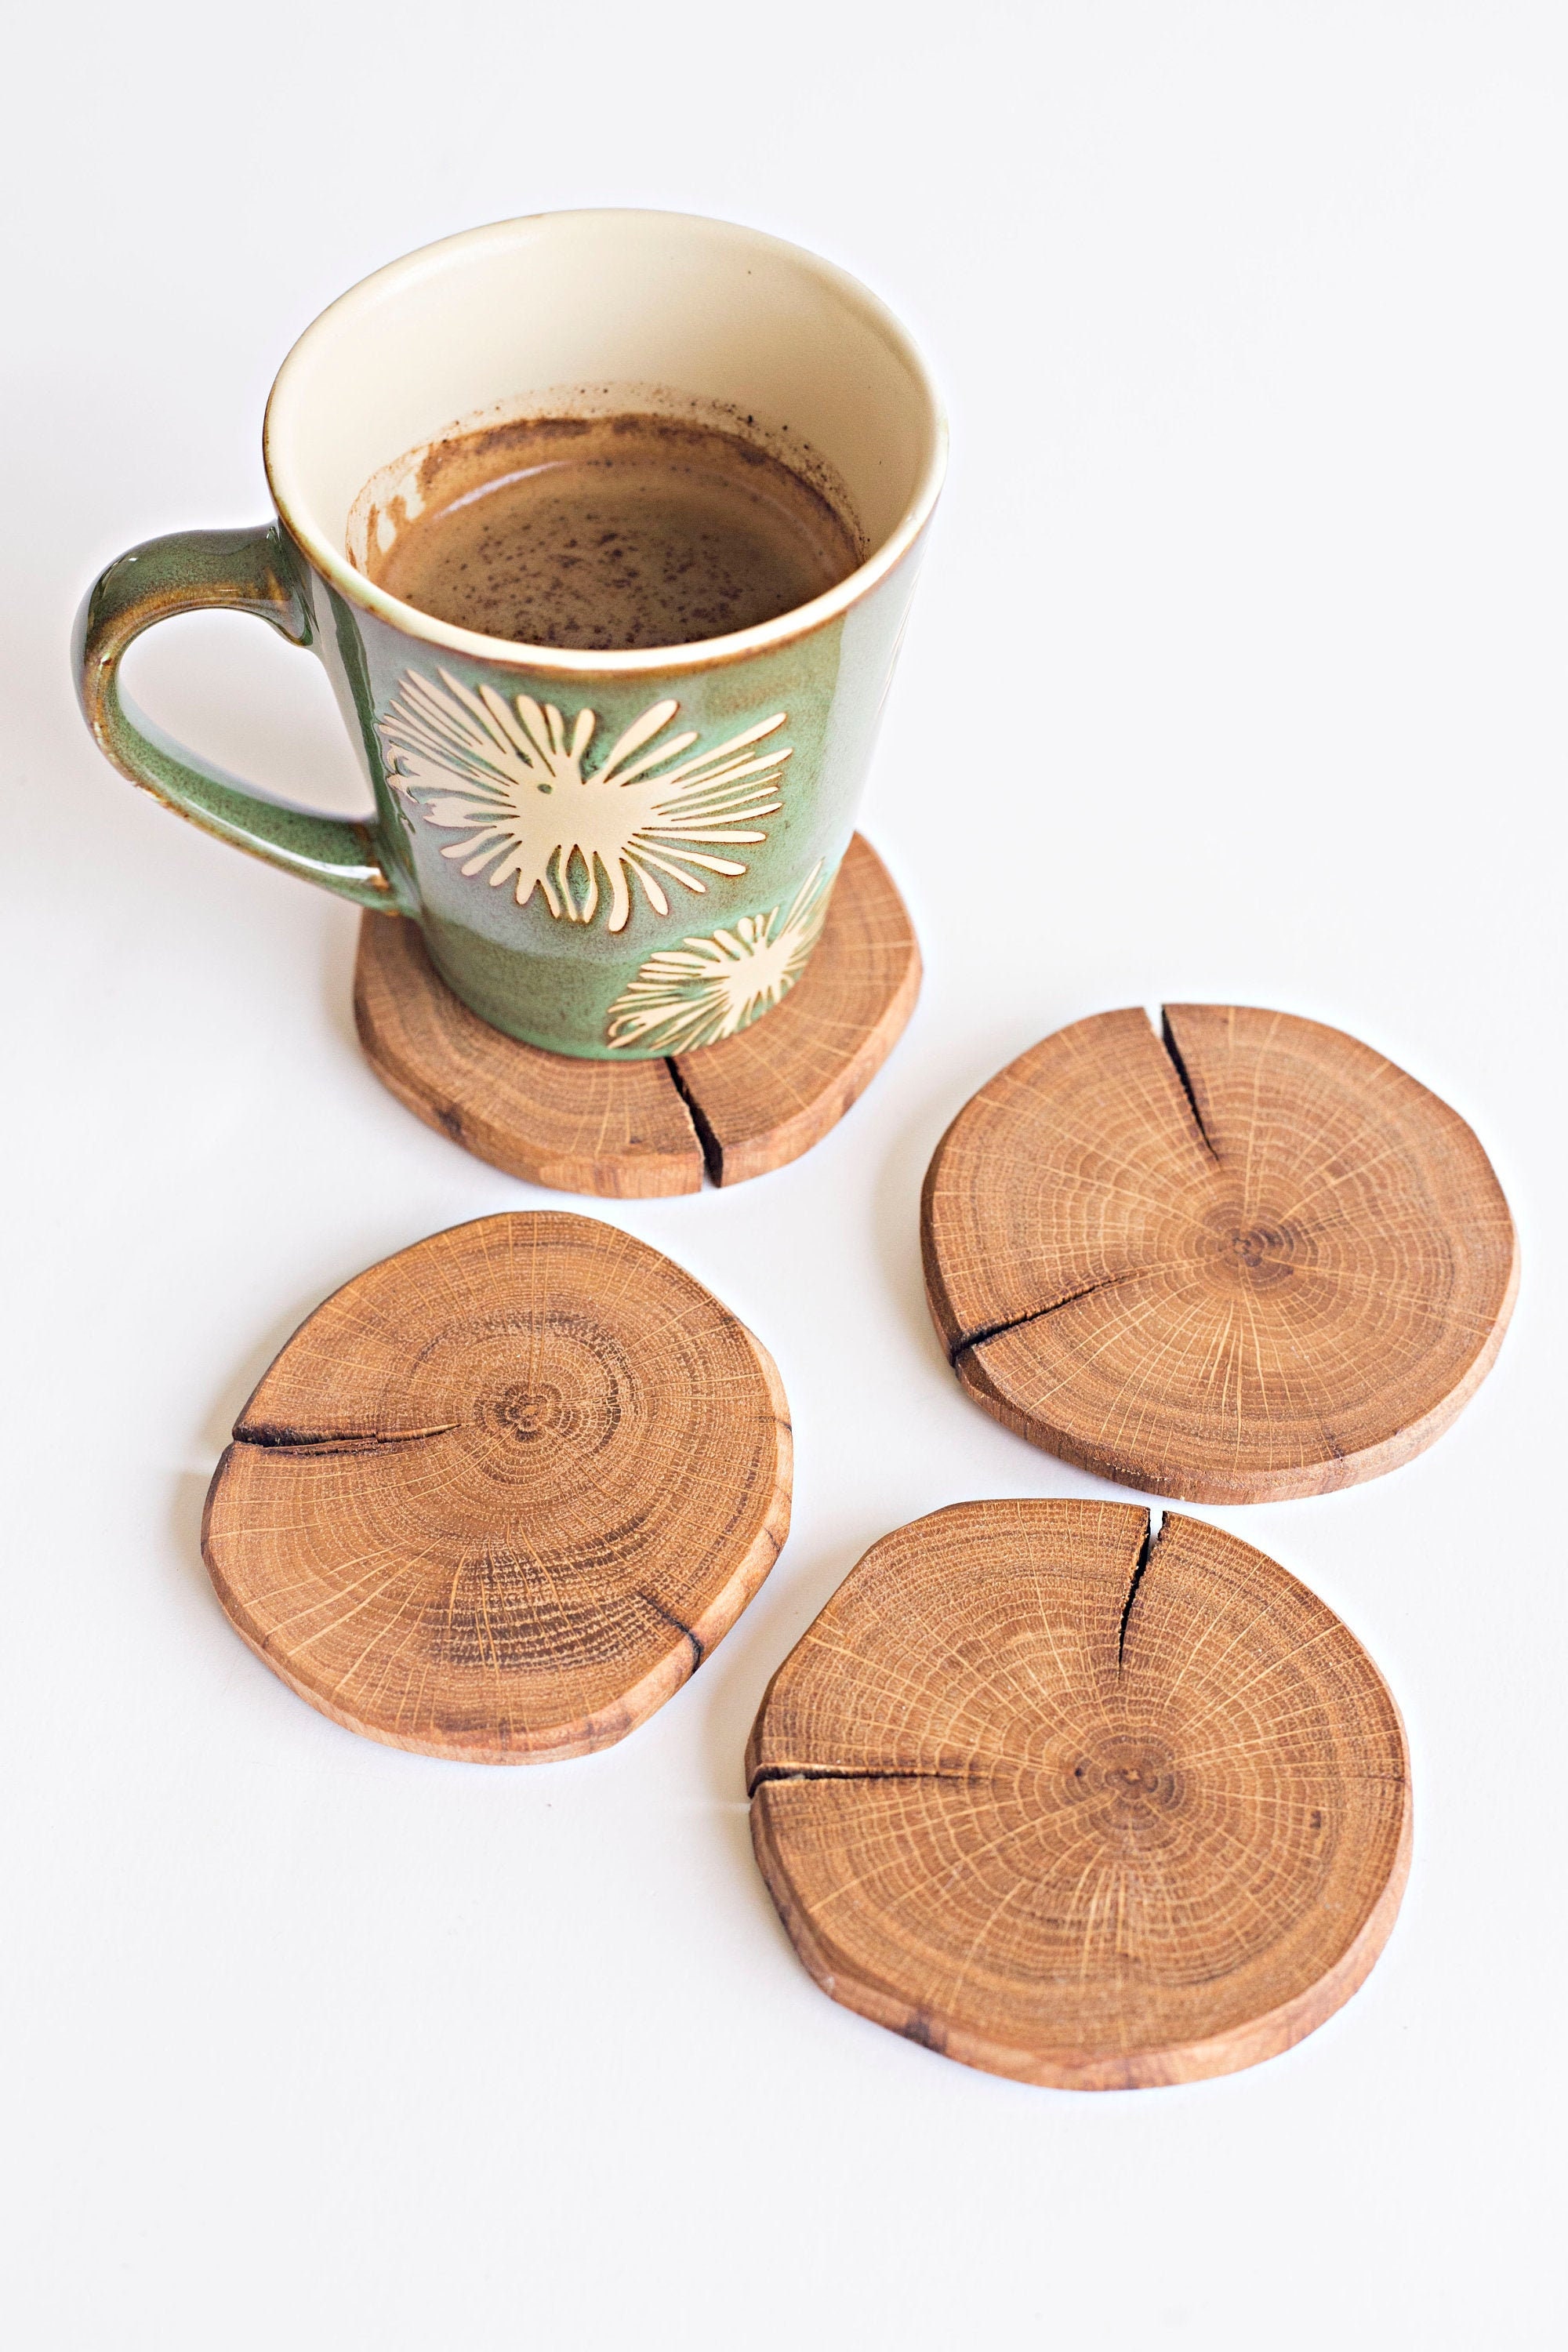 VieWood Wooden Coasters for Drinks - Natural Wood Drink Coaster Set for Drinking Glasses, Tabletop Protection for Any Table Type (Set of 4)